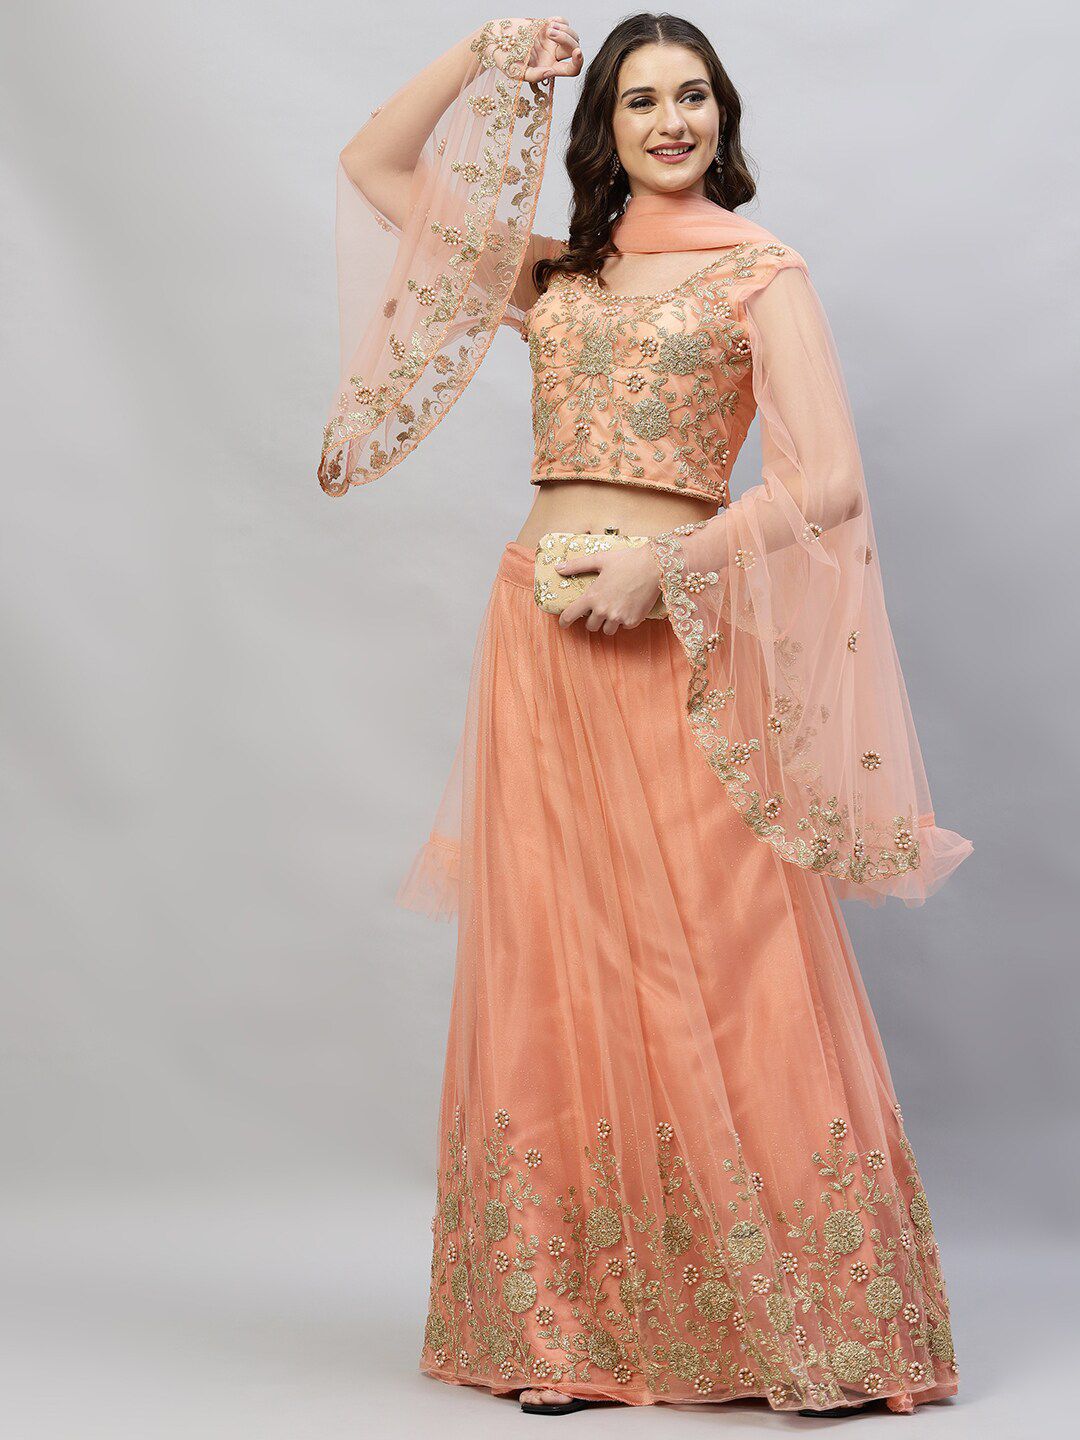 RedRound Peach-Coloured & Gold-Toned Embroidered Semi-Stitched Lehenga & Unstitched Blouse With Dupatta Price in India